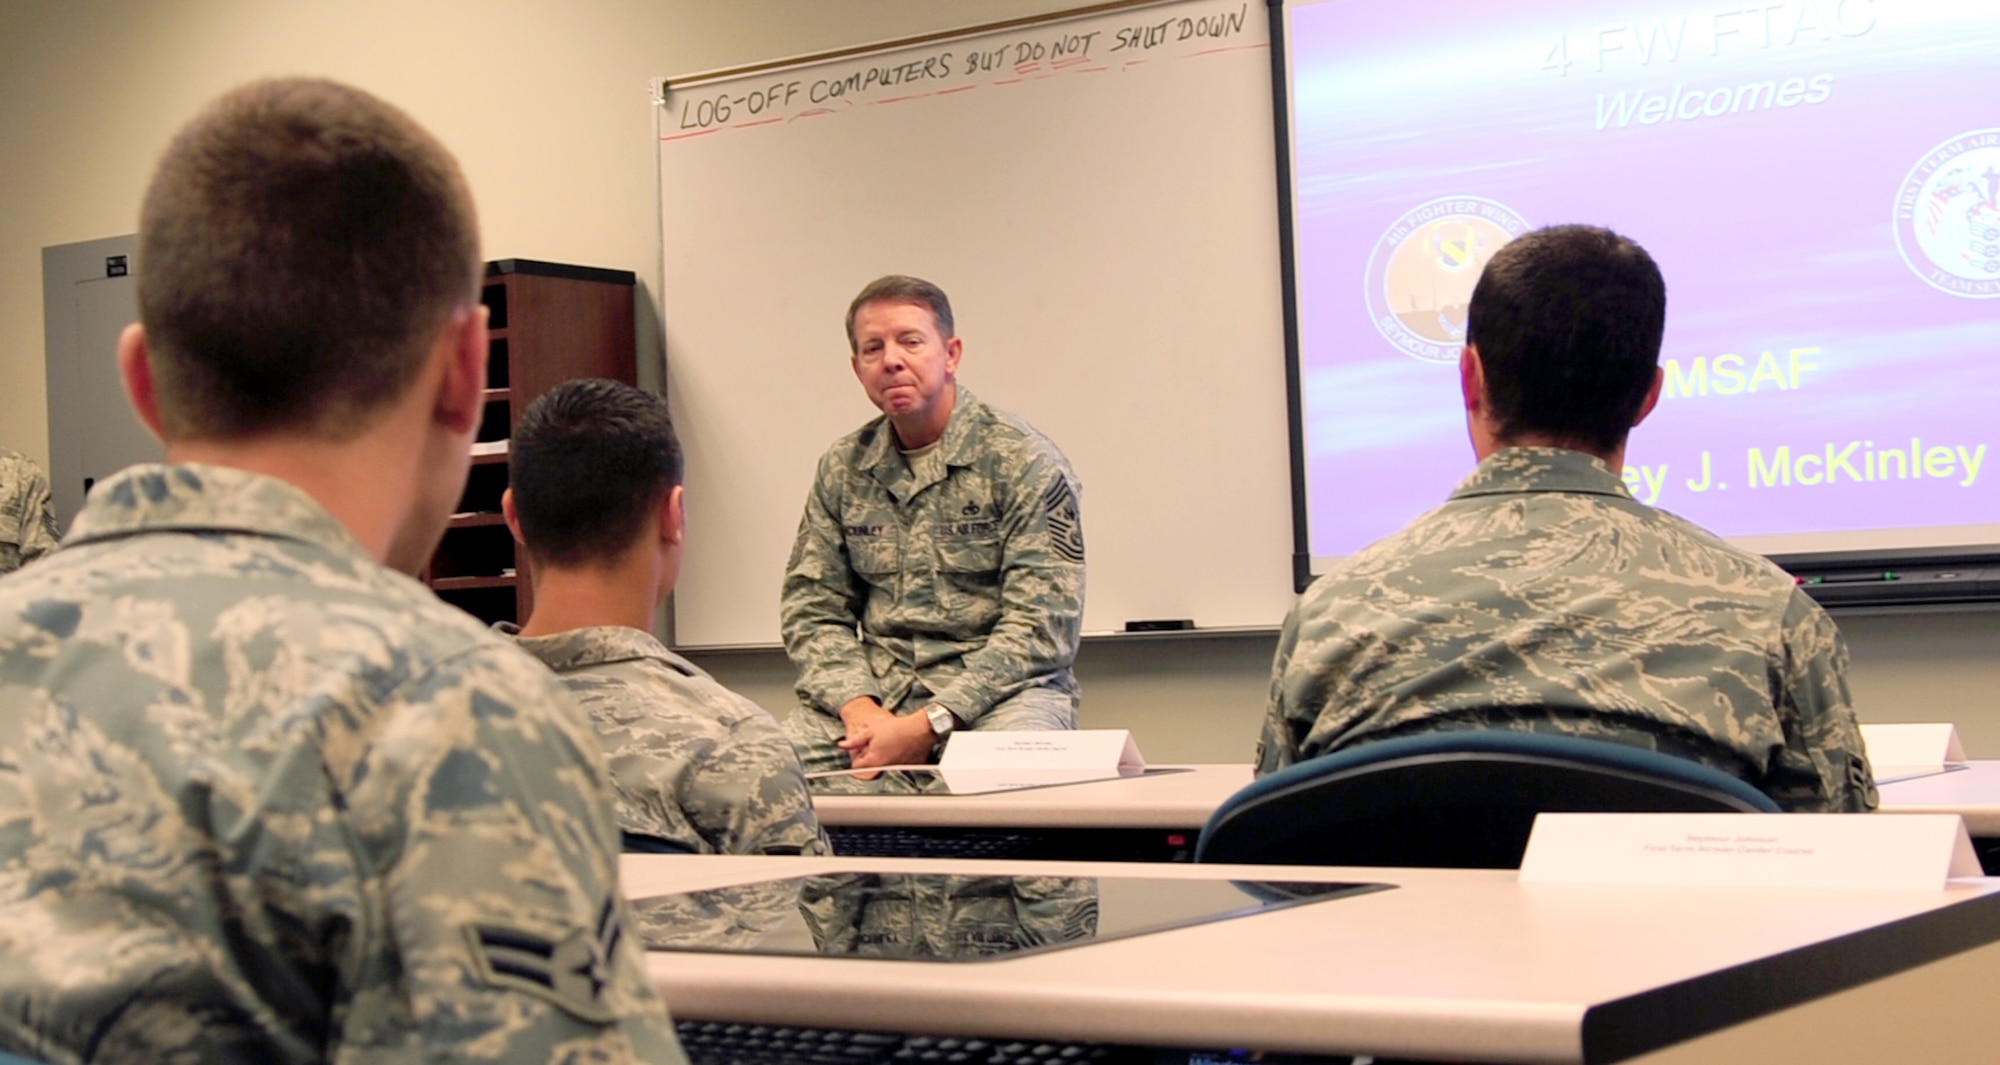 Chief Master Sgt. of the Air Force Rodney McKinley addresses Airmen enrolled at the First-Term Airmen?s Center during his visit to Seymour Johnson Air Force Base, N.C., June 12, 2009. Like the FTAC Airmen, Seymour Johnson Air Force Base was Chief McKinley?s first duty station. (U.S. Air Force photo by Airman 1st Class Rae Perry)